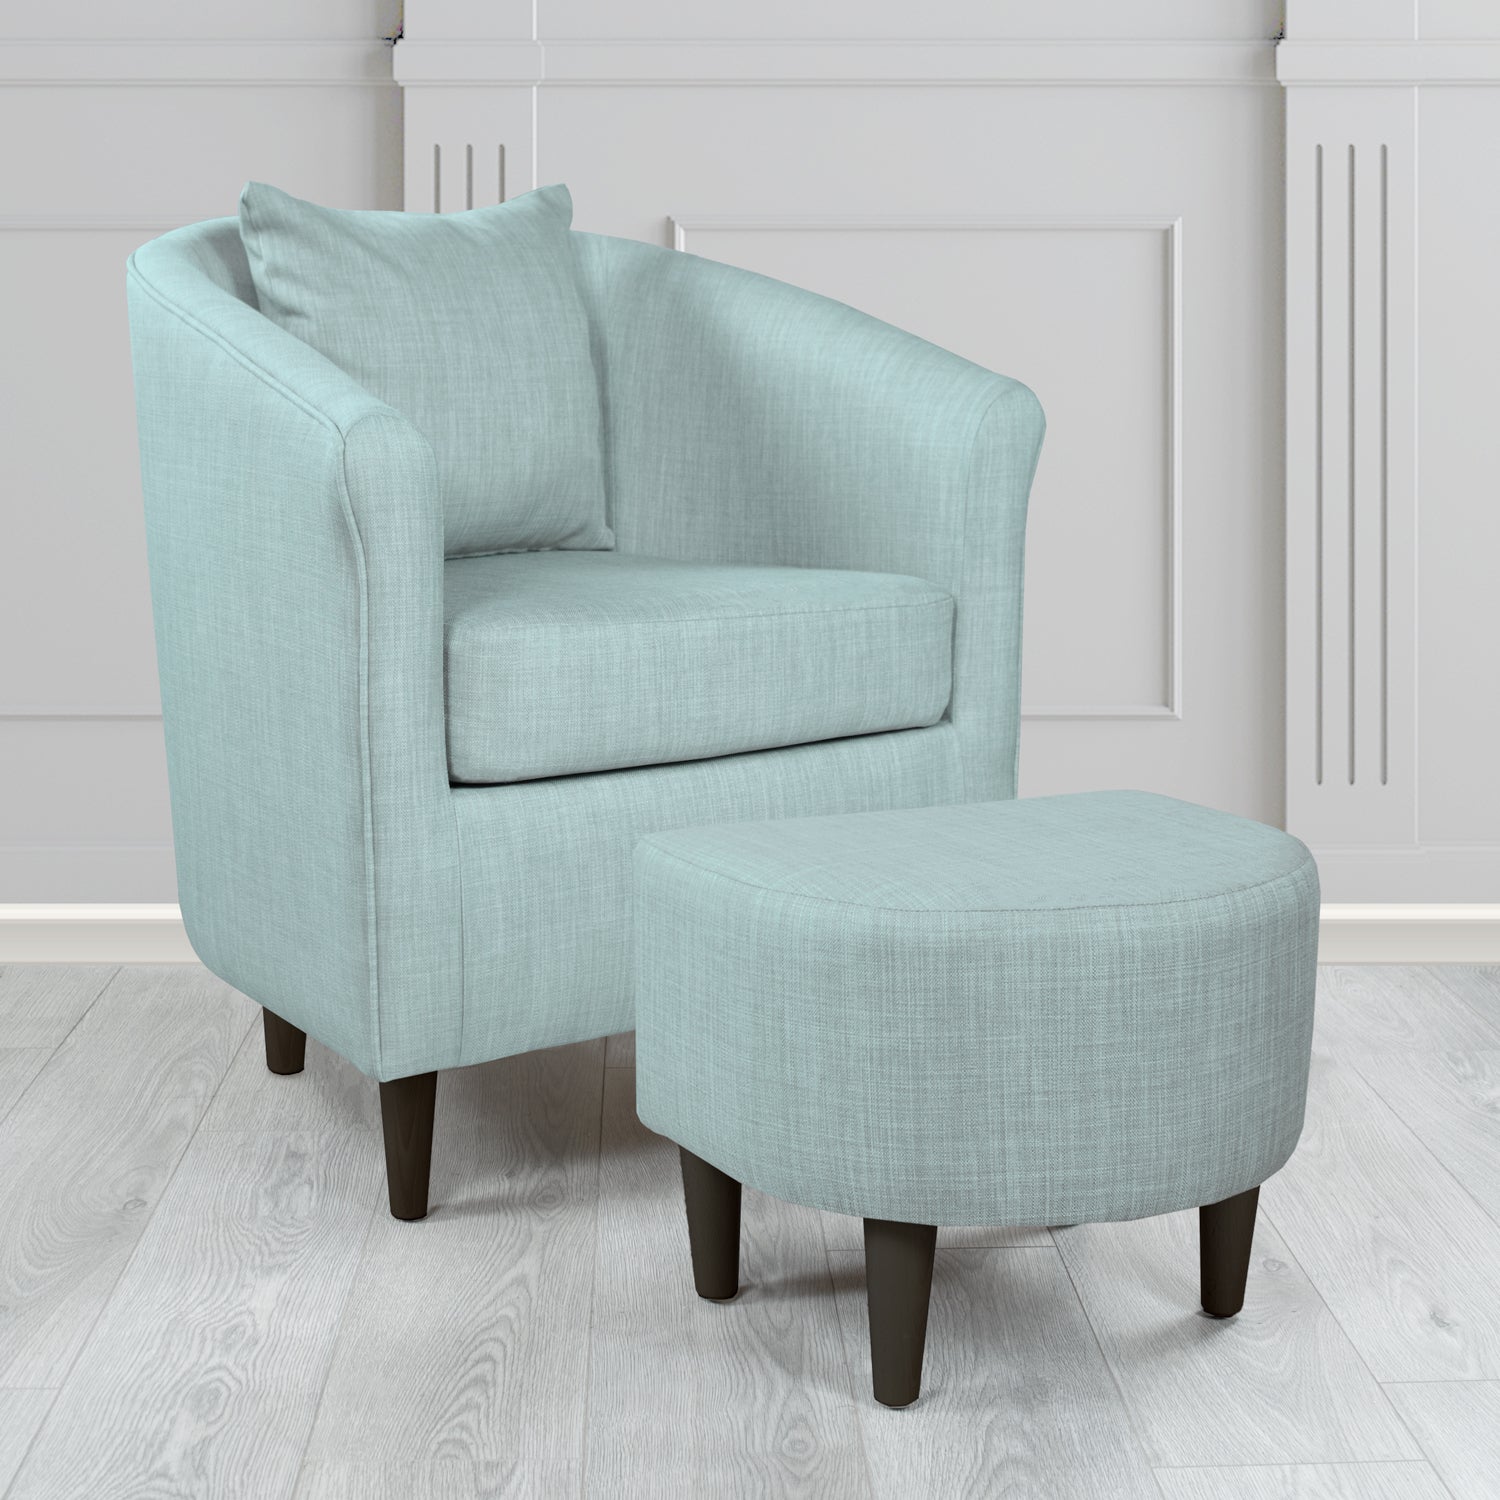 St Tropez Charles Sky Plain Linen Fabric Tub Chair & Footstool Set with Scatter Cushion - The Tub Chair Shop